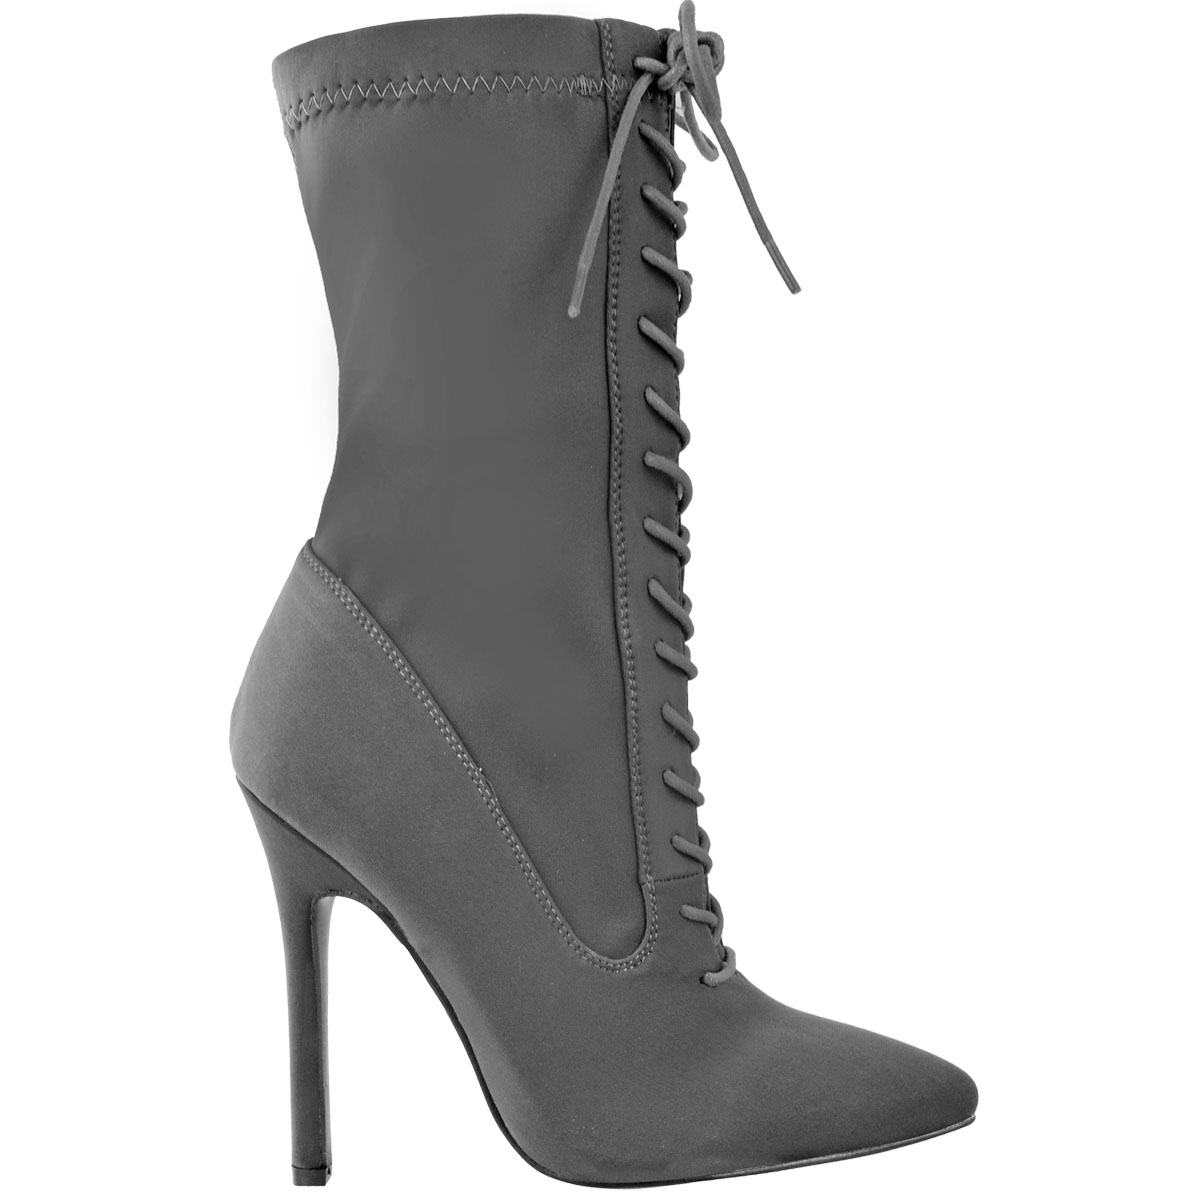 Ladies Womens Lace Up Stretchy High Heel Stiletto Ankle Boots Party ...